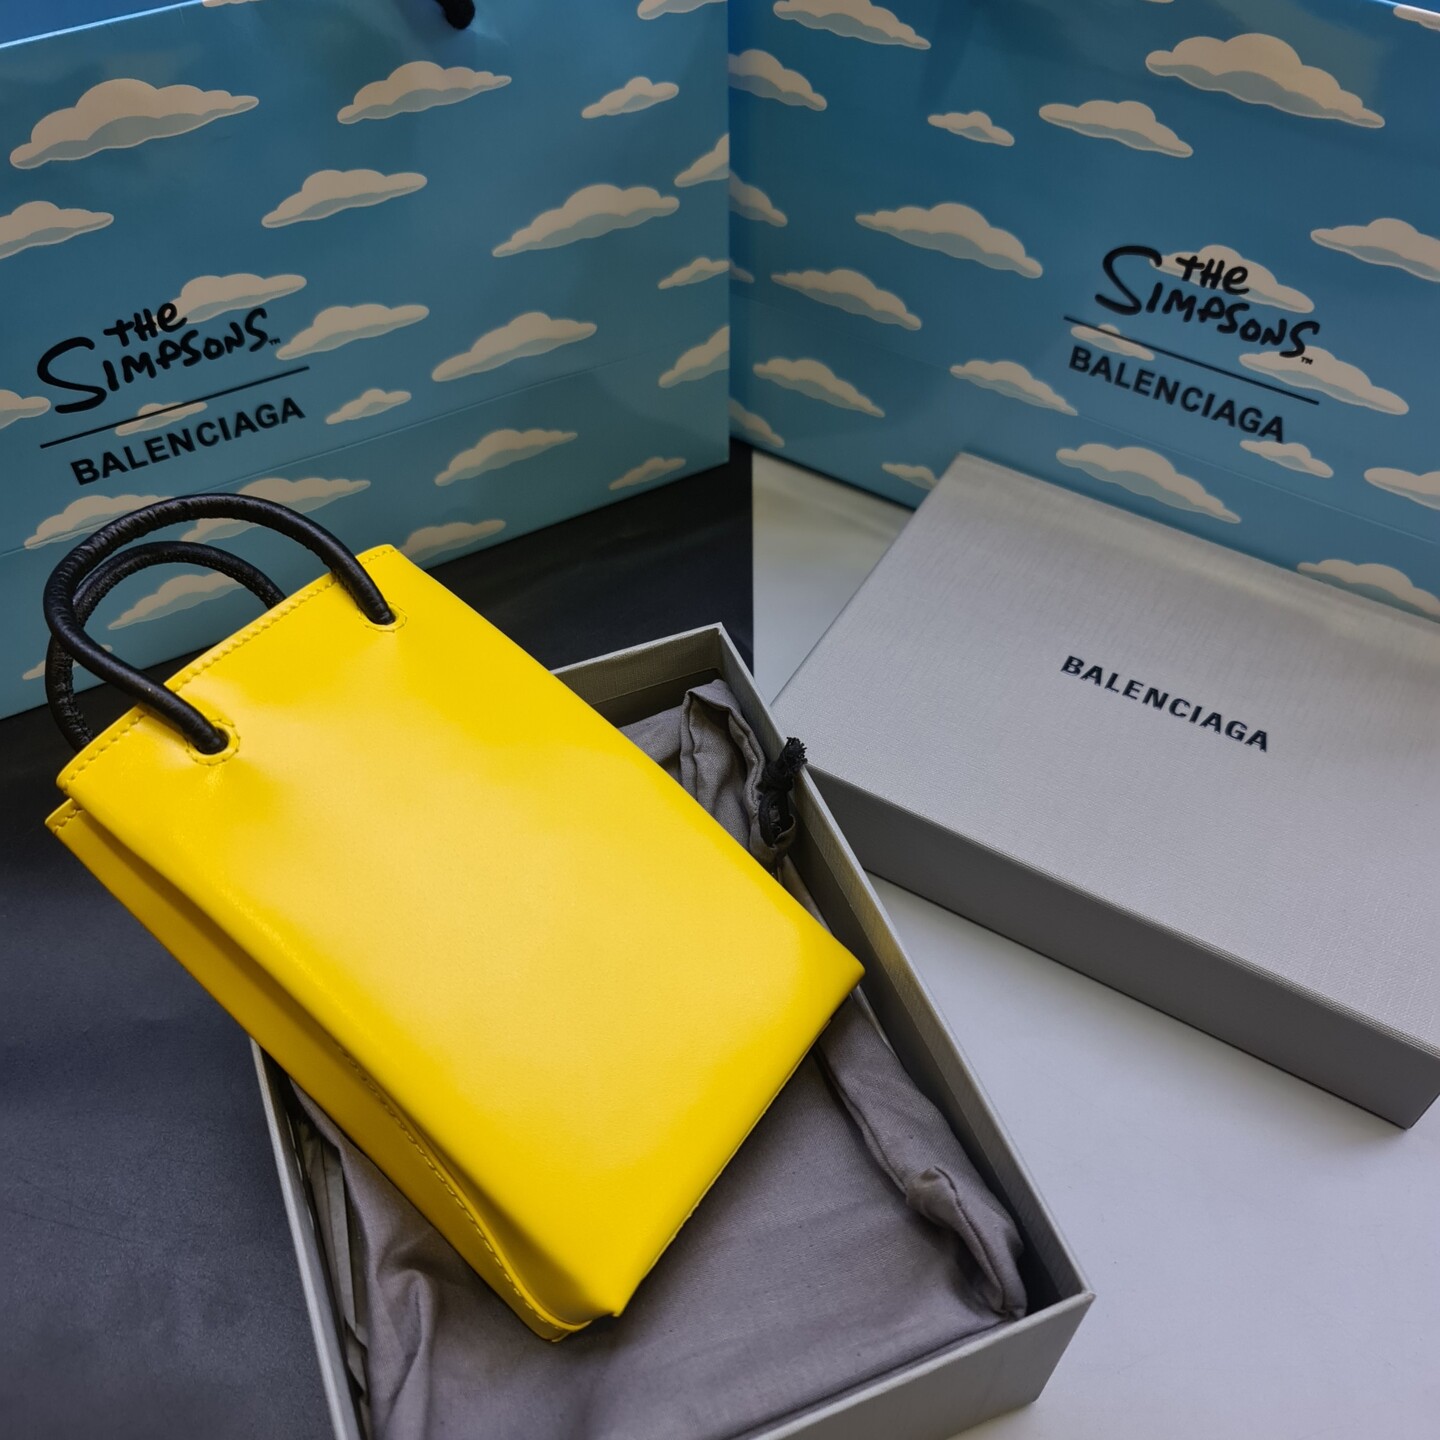 Balenciaga just dropped a capsule collection with The Simpsons